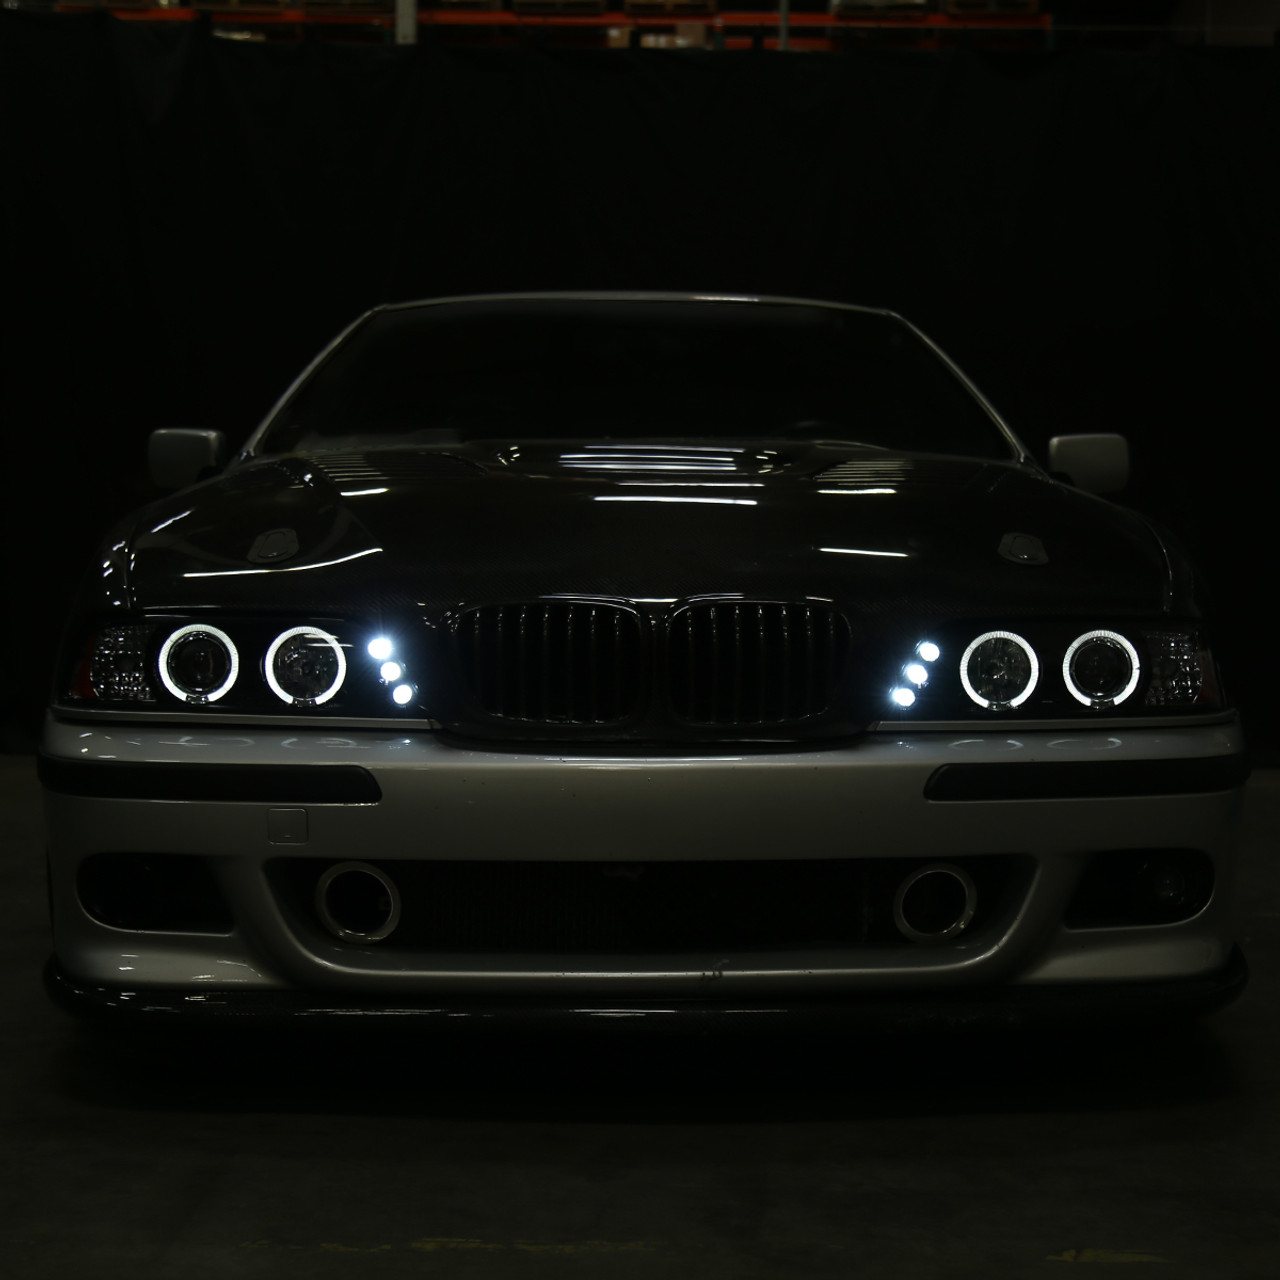 2000 BMW E39 M5, 2000 model with facelift headlights, updat…